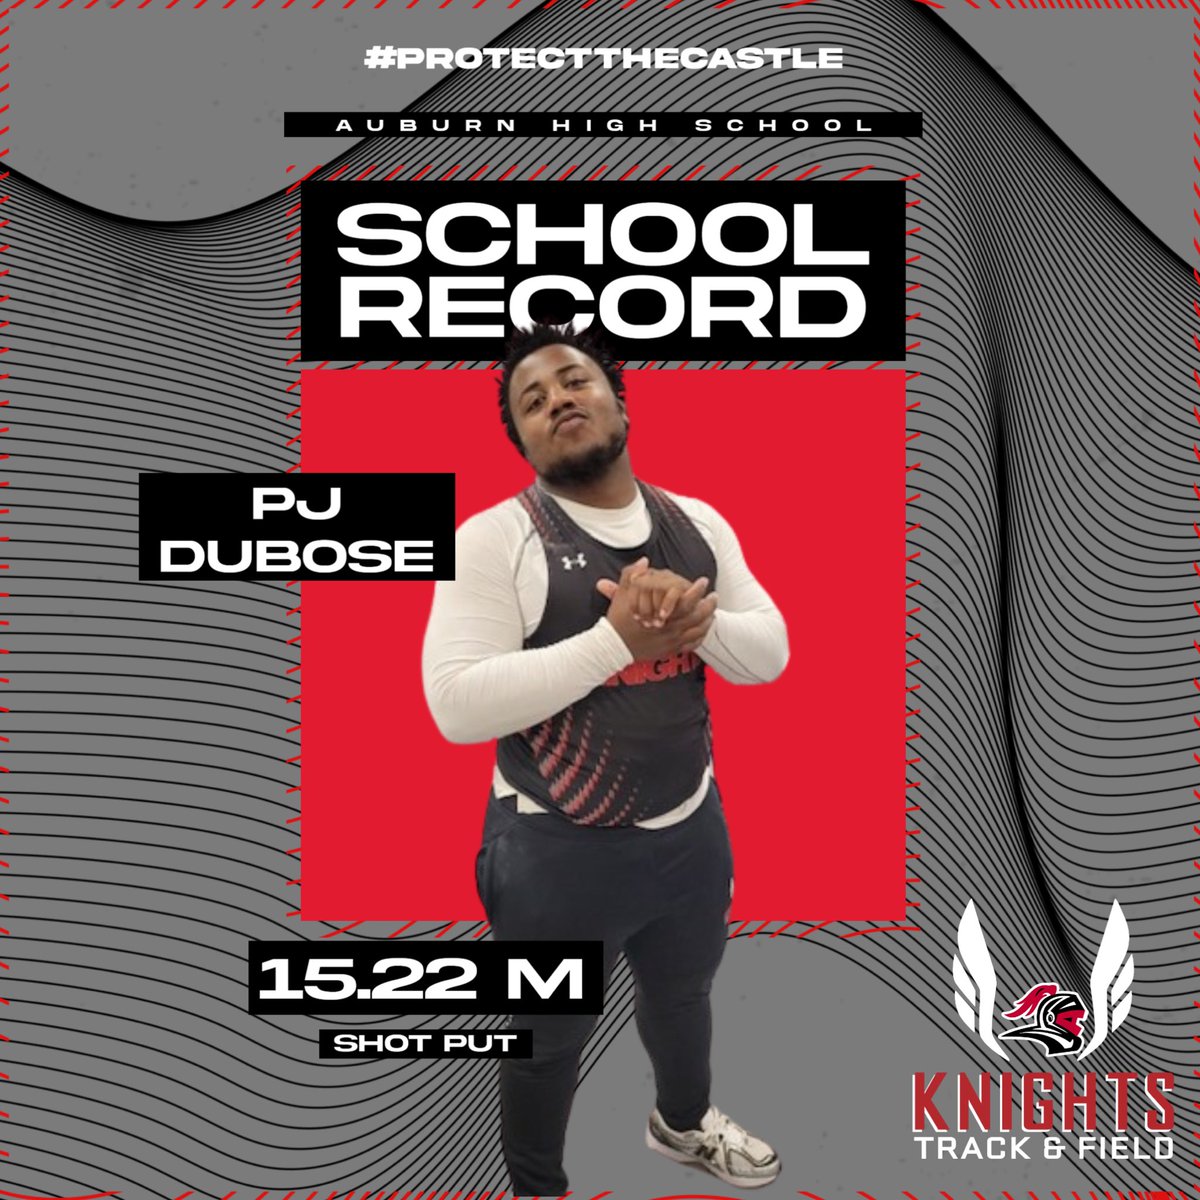 Congrats to PJ Dubose on SMASHING the school’s record for shot put!